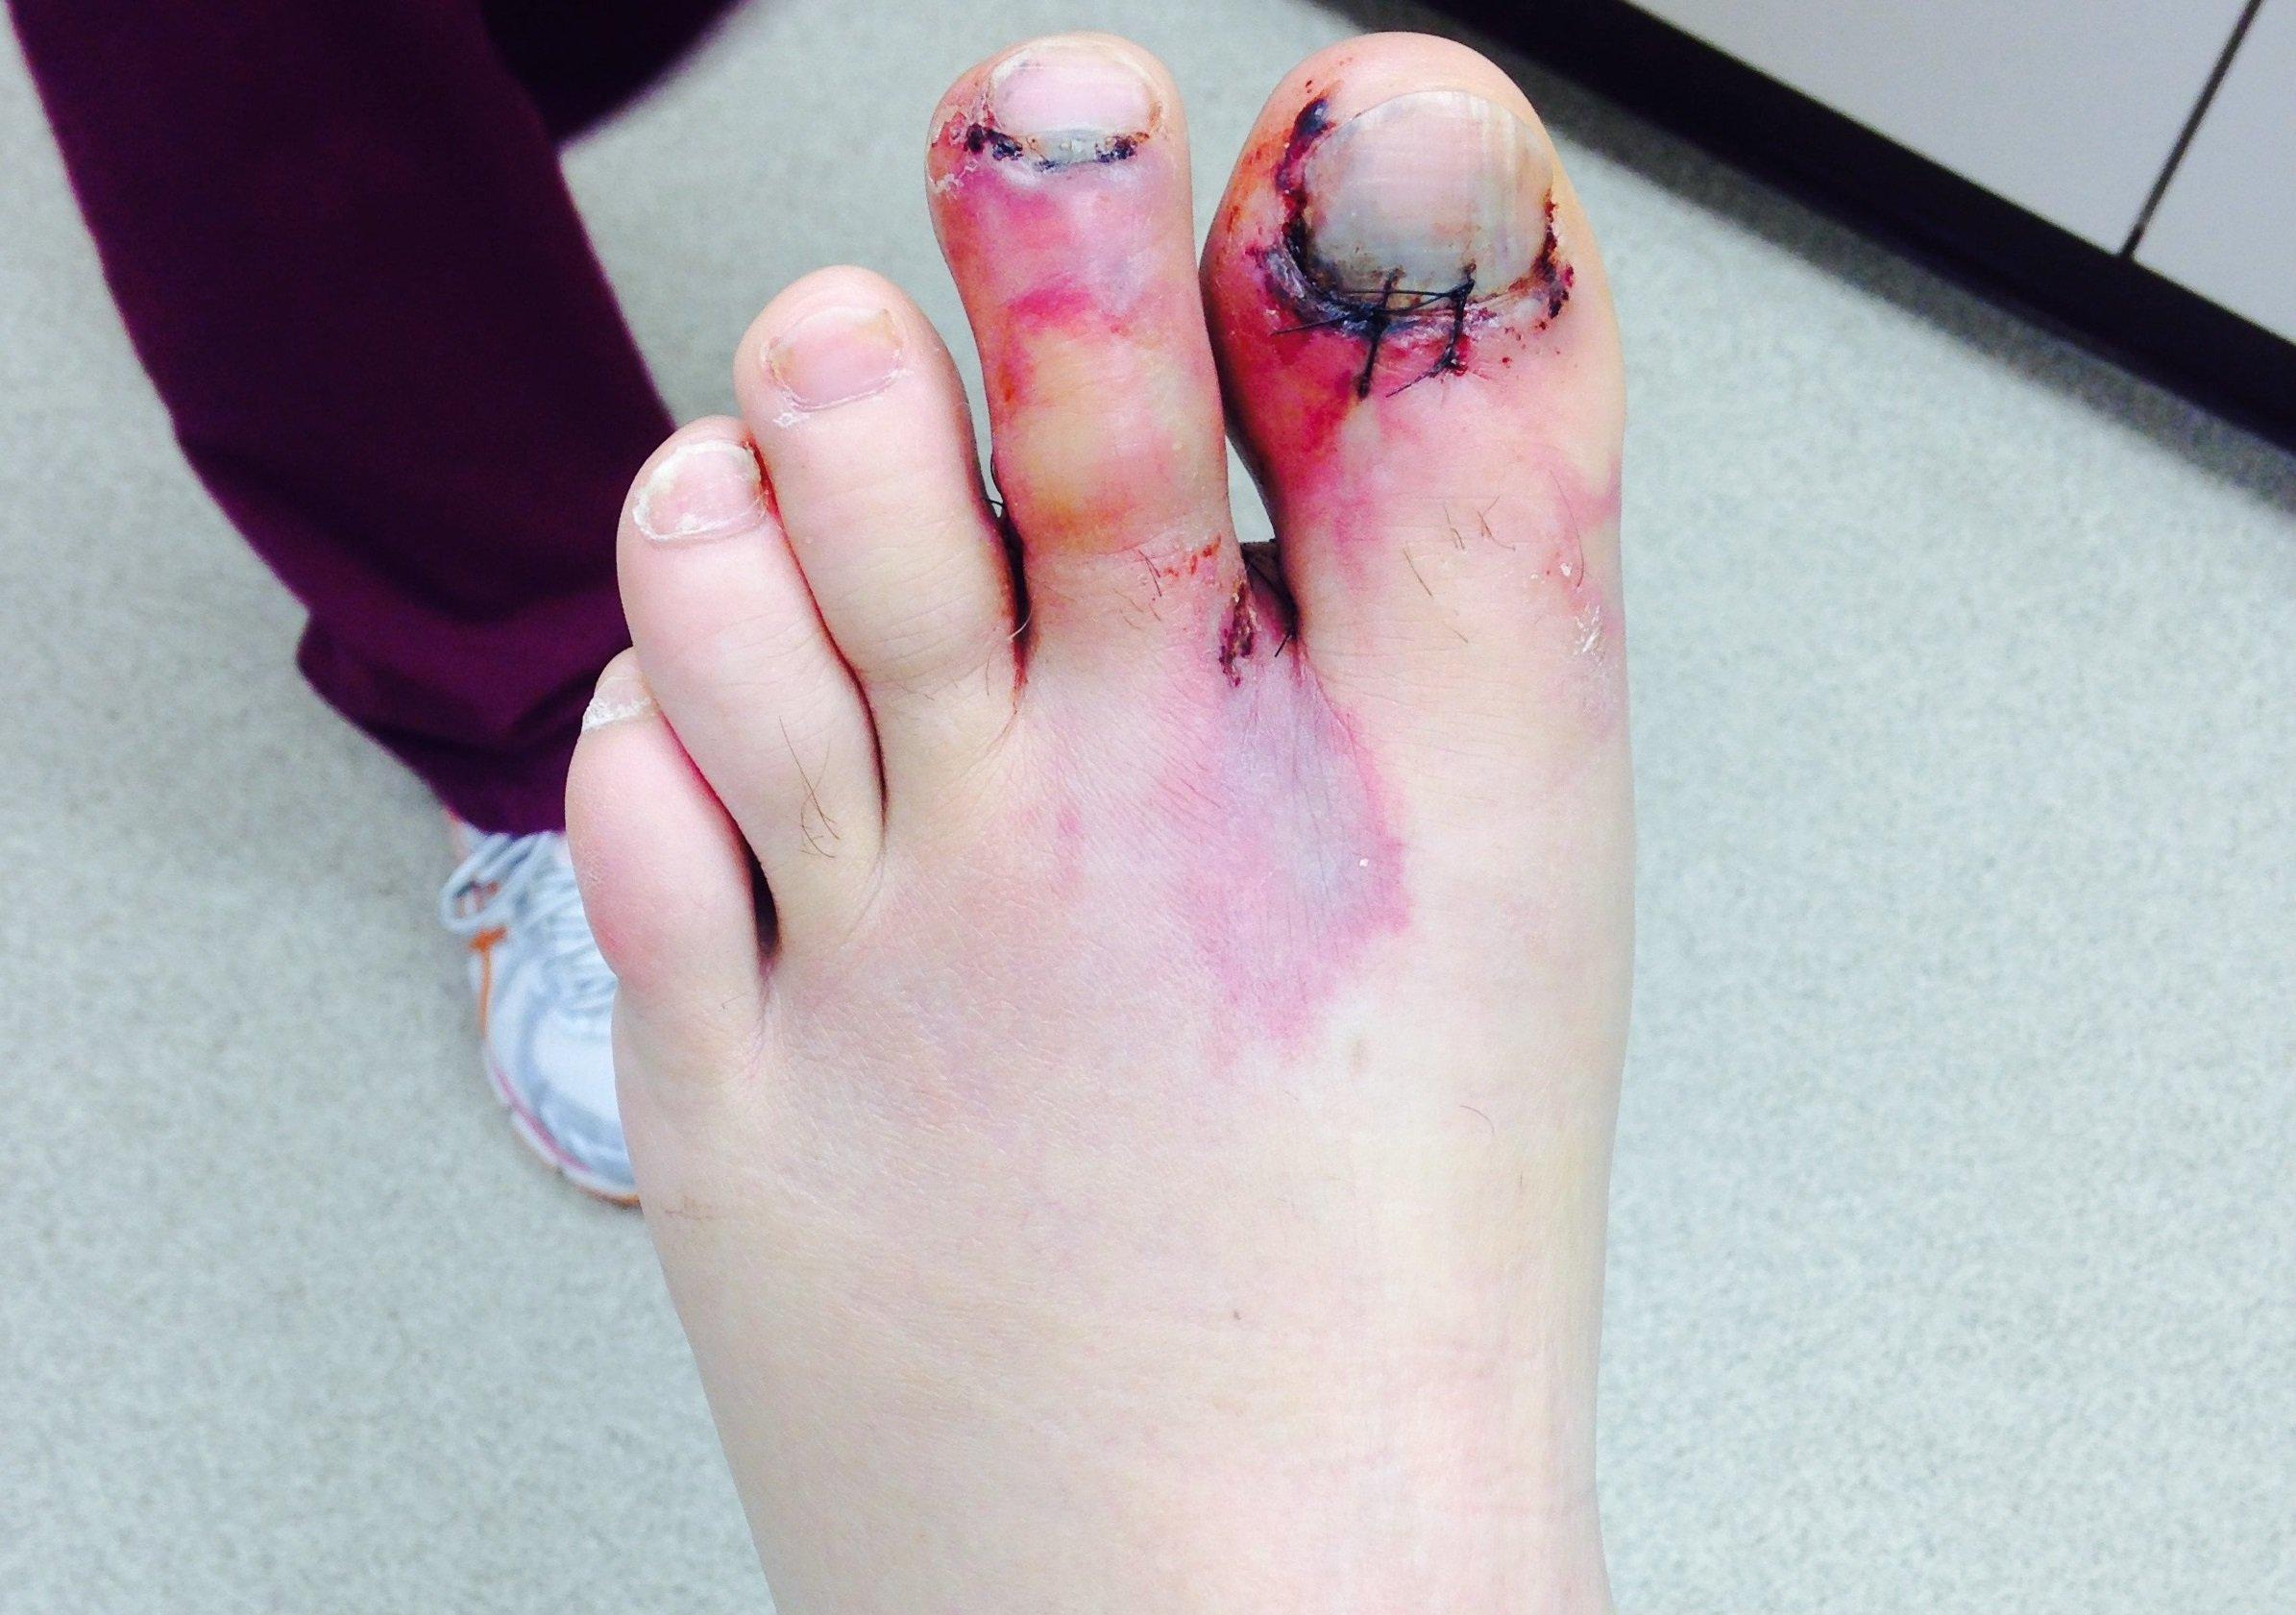 Lee Lakosky fractured toes